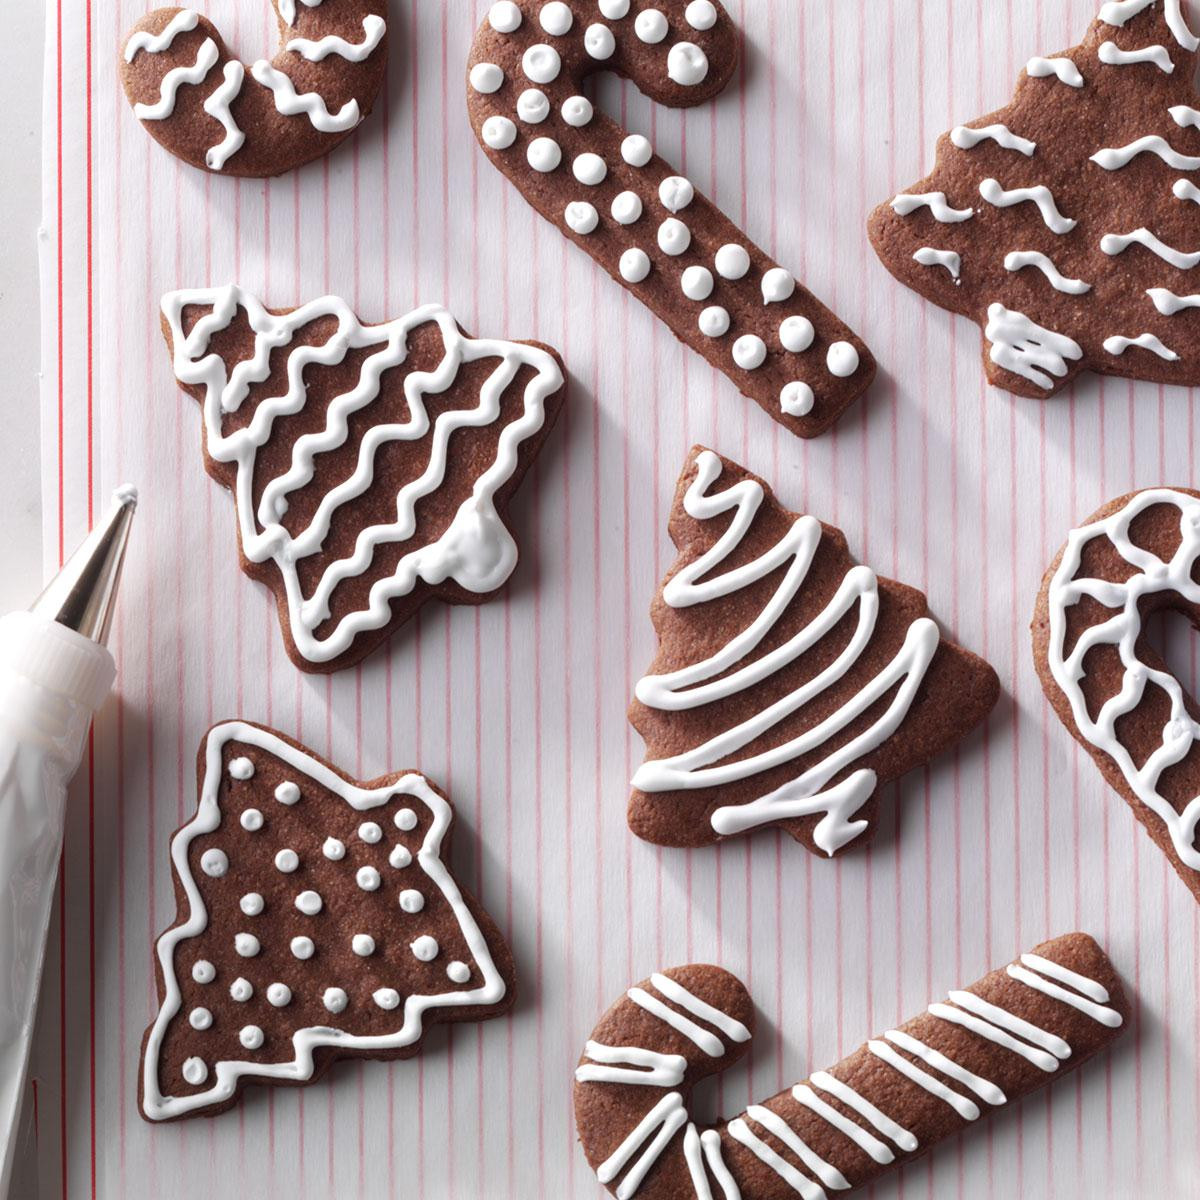 Chocolate Cut Out Cookies Unique Chocolate Cutout Cookies Recipe